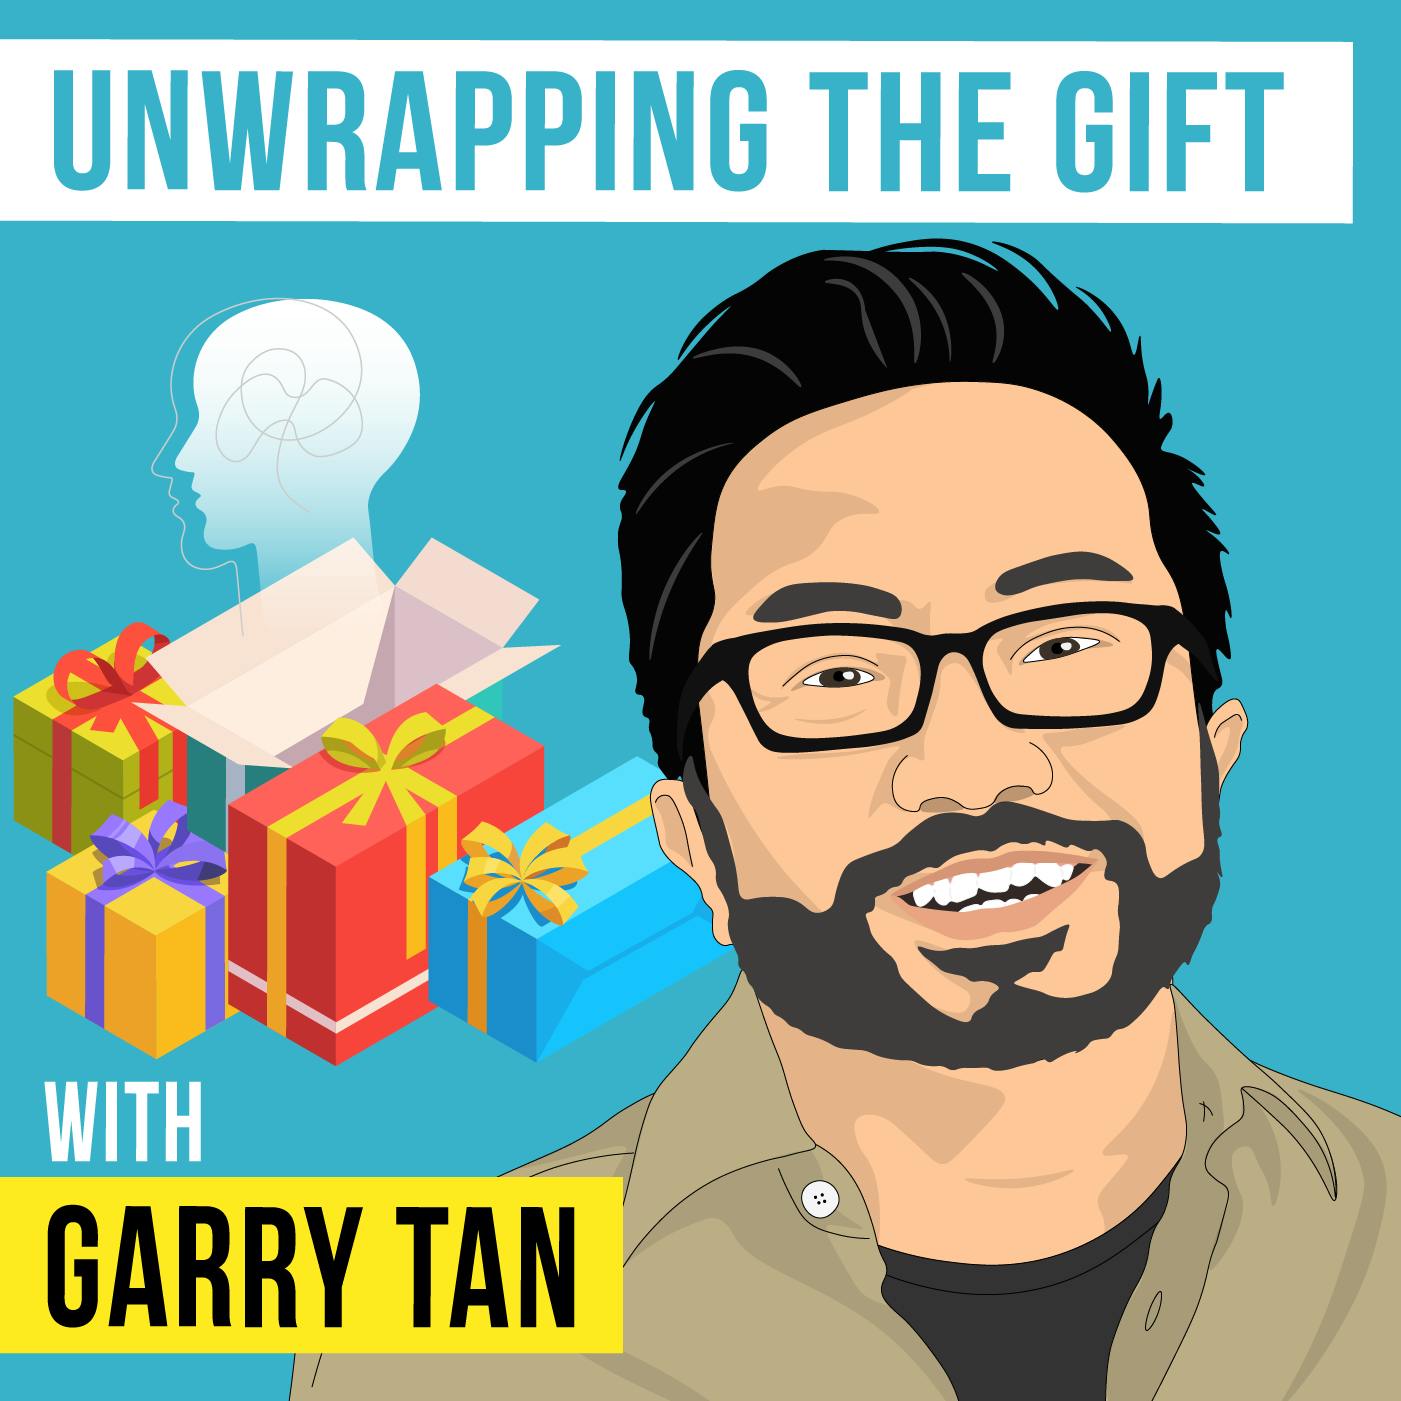 Garry Tan - Unwrapping the Gift - [Invest Like the Best, EP. 267]